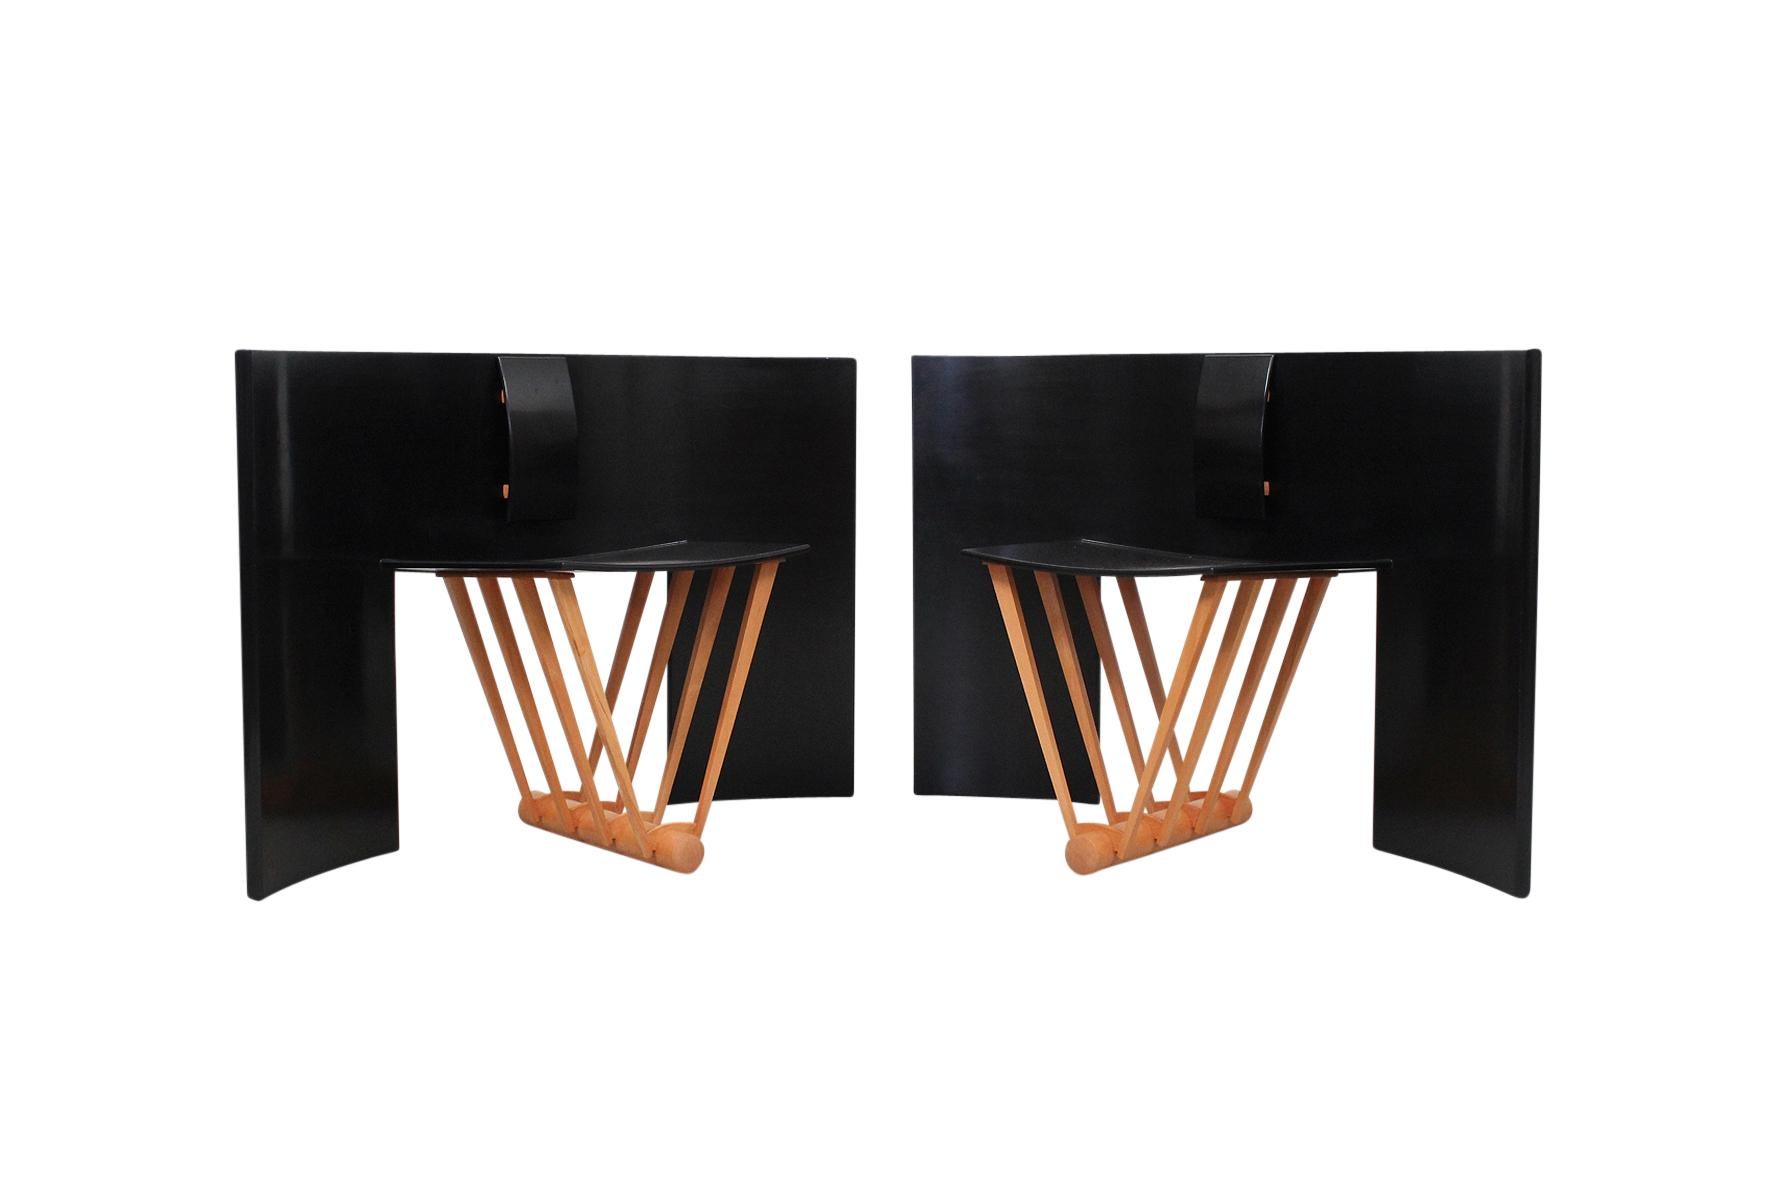 Pair of architectural chairs by widely exhibited studio furniture maker Thomas Hucker. These 